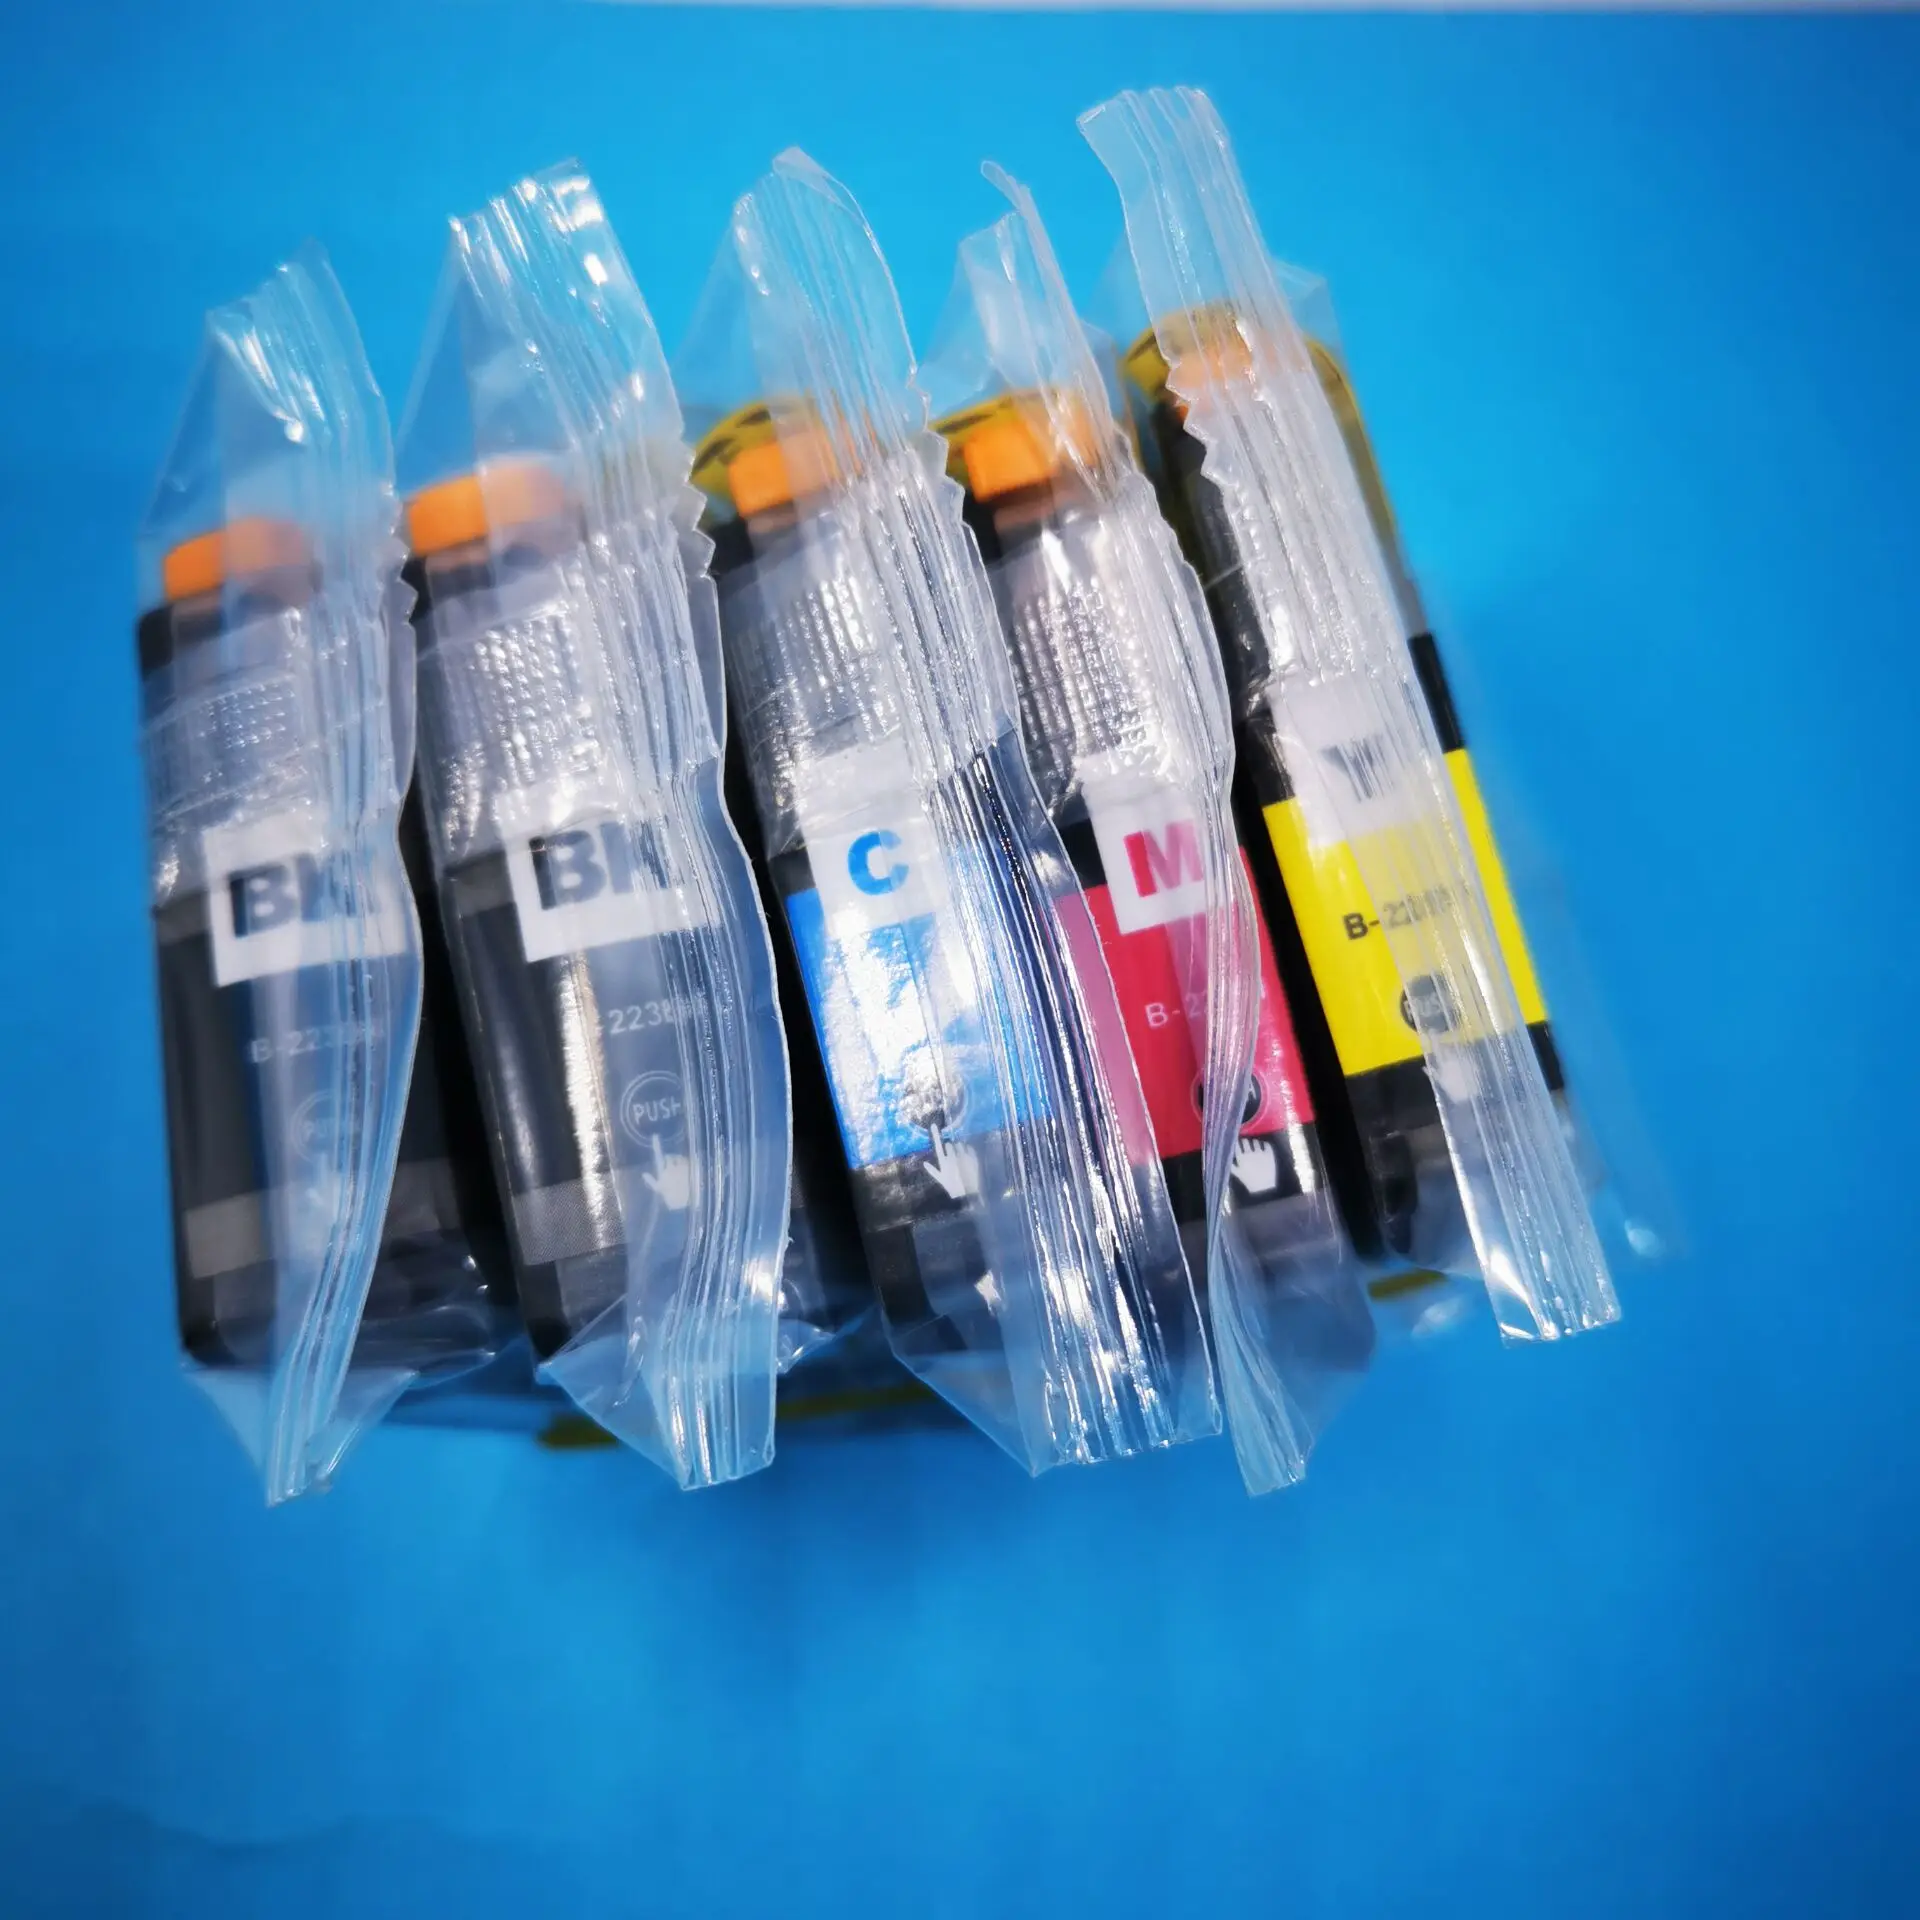 

Hot sales LC223 /221XL Compatible Ink Cartridge For Brother DCP-J562DW J4120DW MFC-J480DW J680DW J880DW J4620DW J5720DW J5320DW